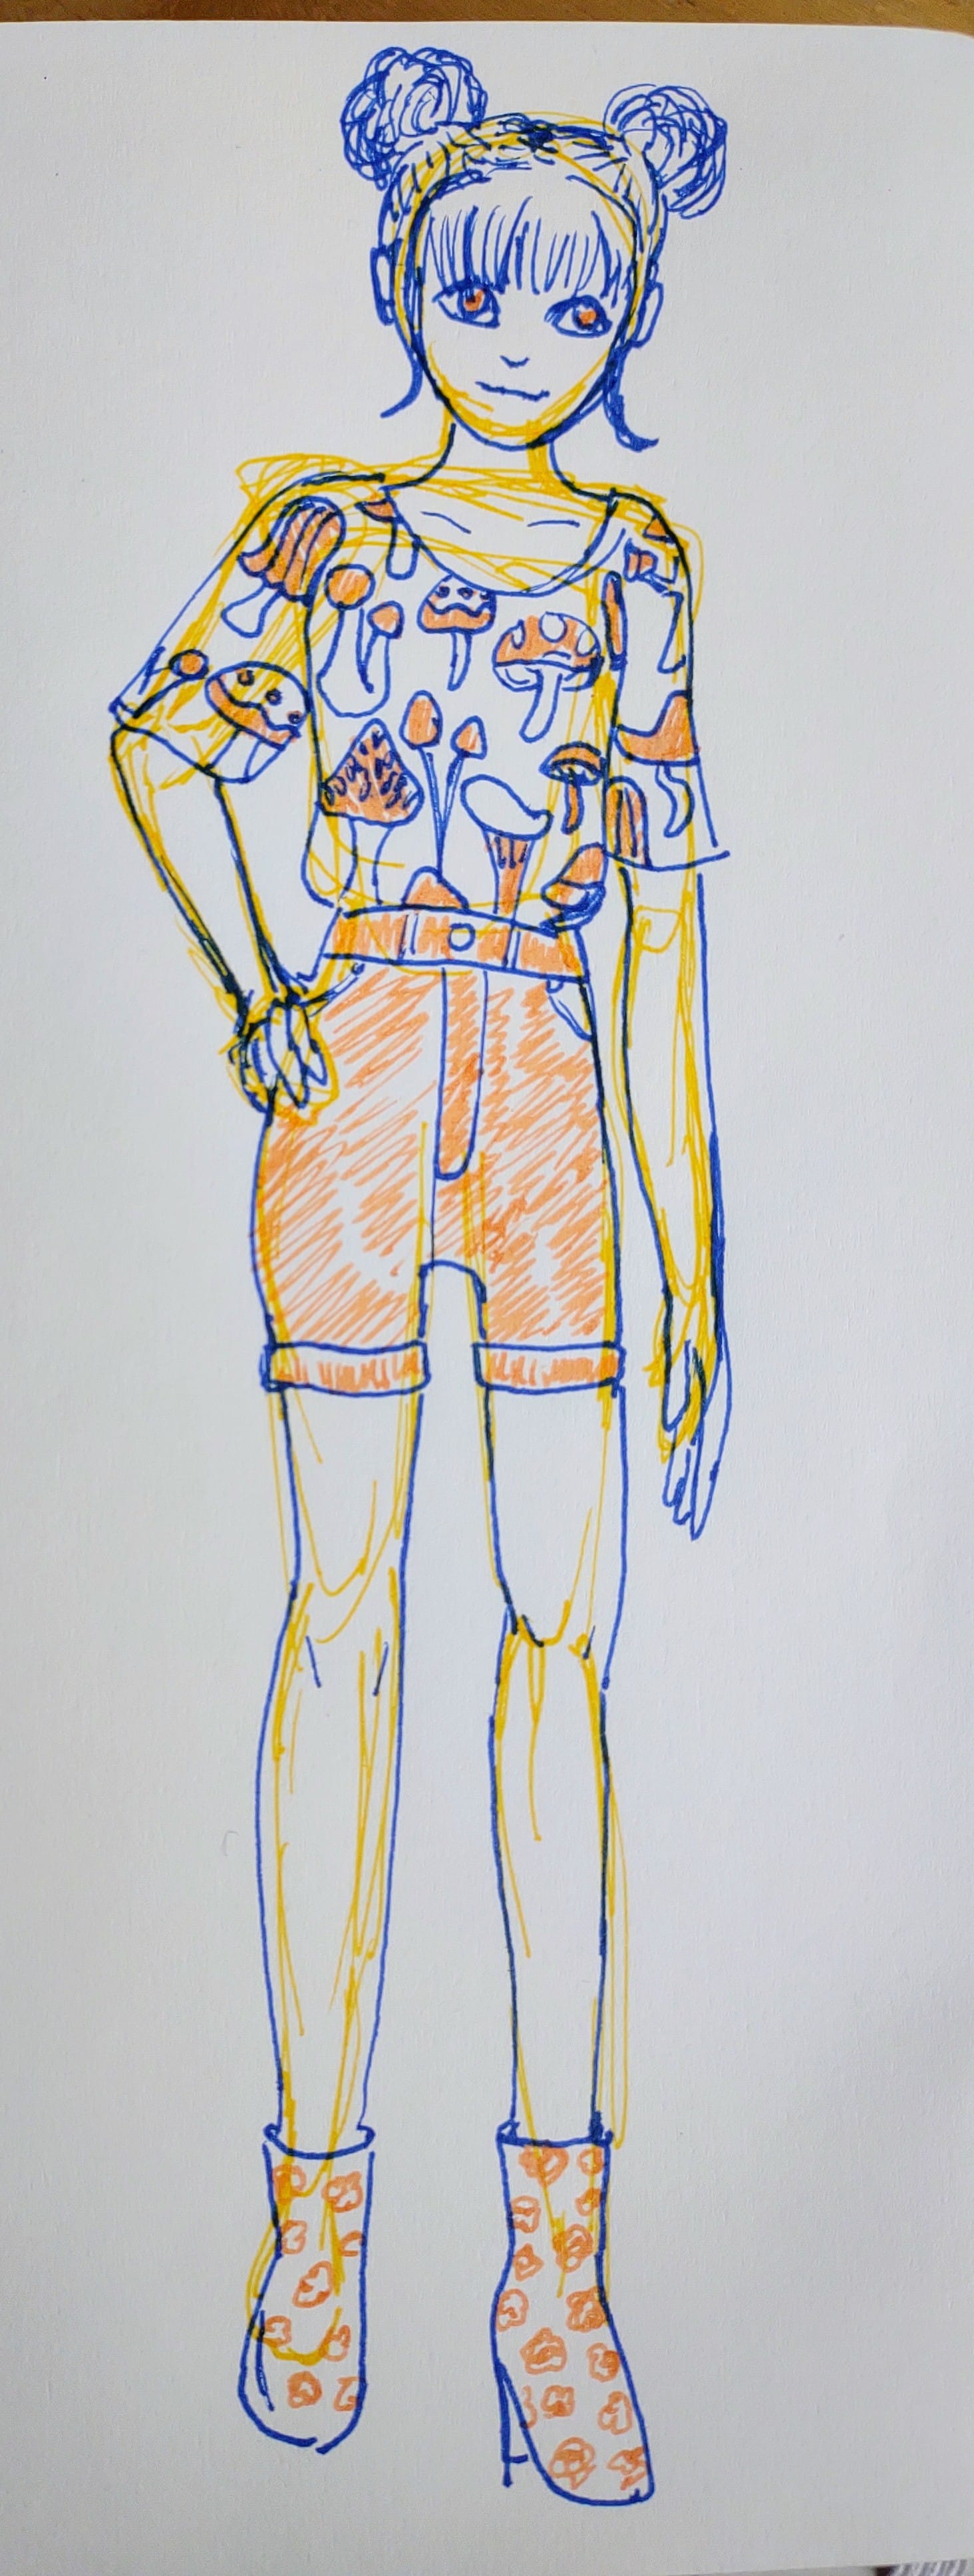 Drawing of a girl with her hair up in two buns, wearing a tee shirt with a pattern of many different kinds of mushroom, high waisted jean shorts, and high heeled boots with a floral pattern. She's standing with her hand on her hip and smiling slightly. There is a rough bottom layer of the sketch in yellow pen, the main lines are in blue pen, and the details of the clothing are colored with orange pen. 